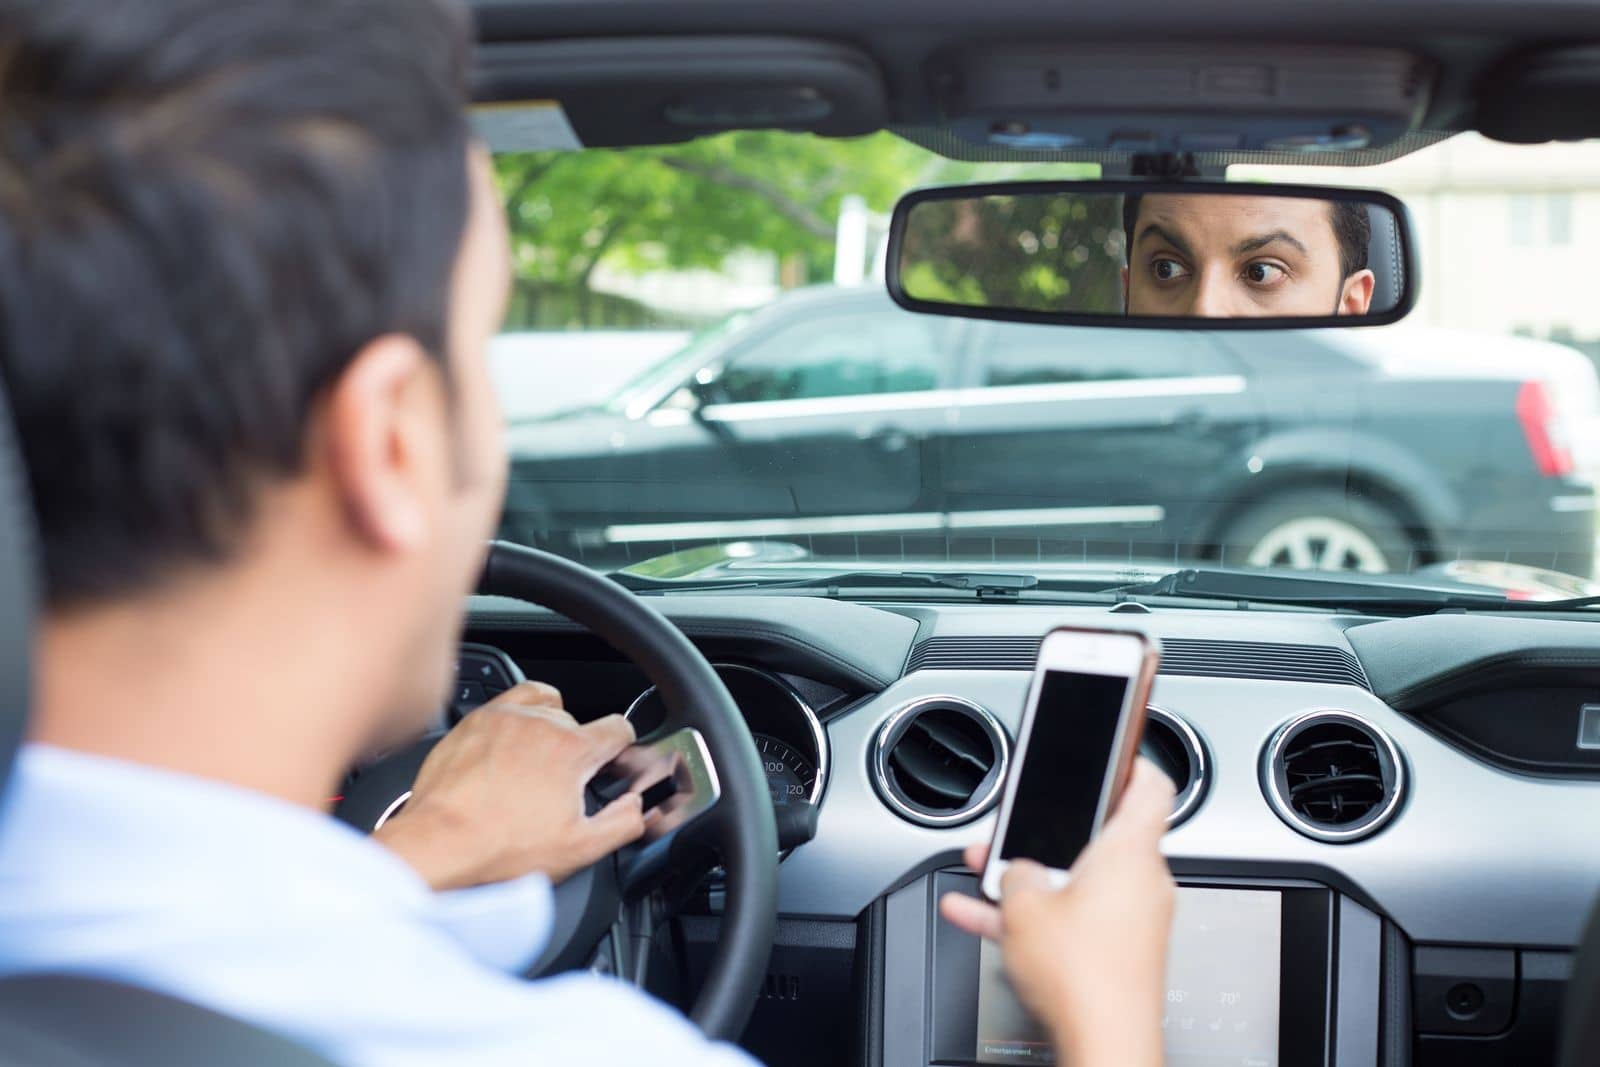 Many States have Already Banned the Use of Mobile Phones While Driving